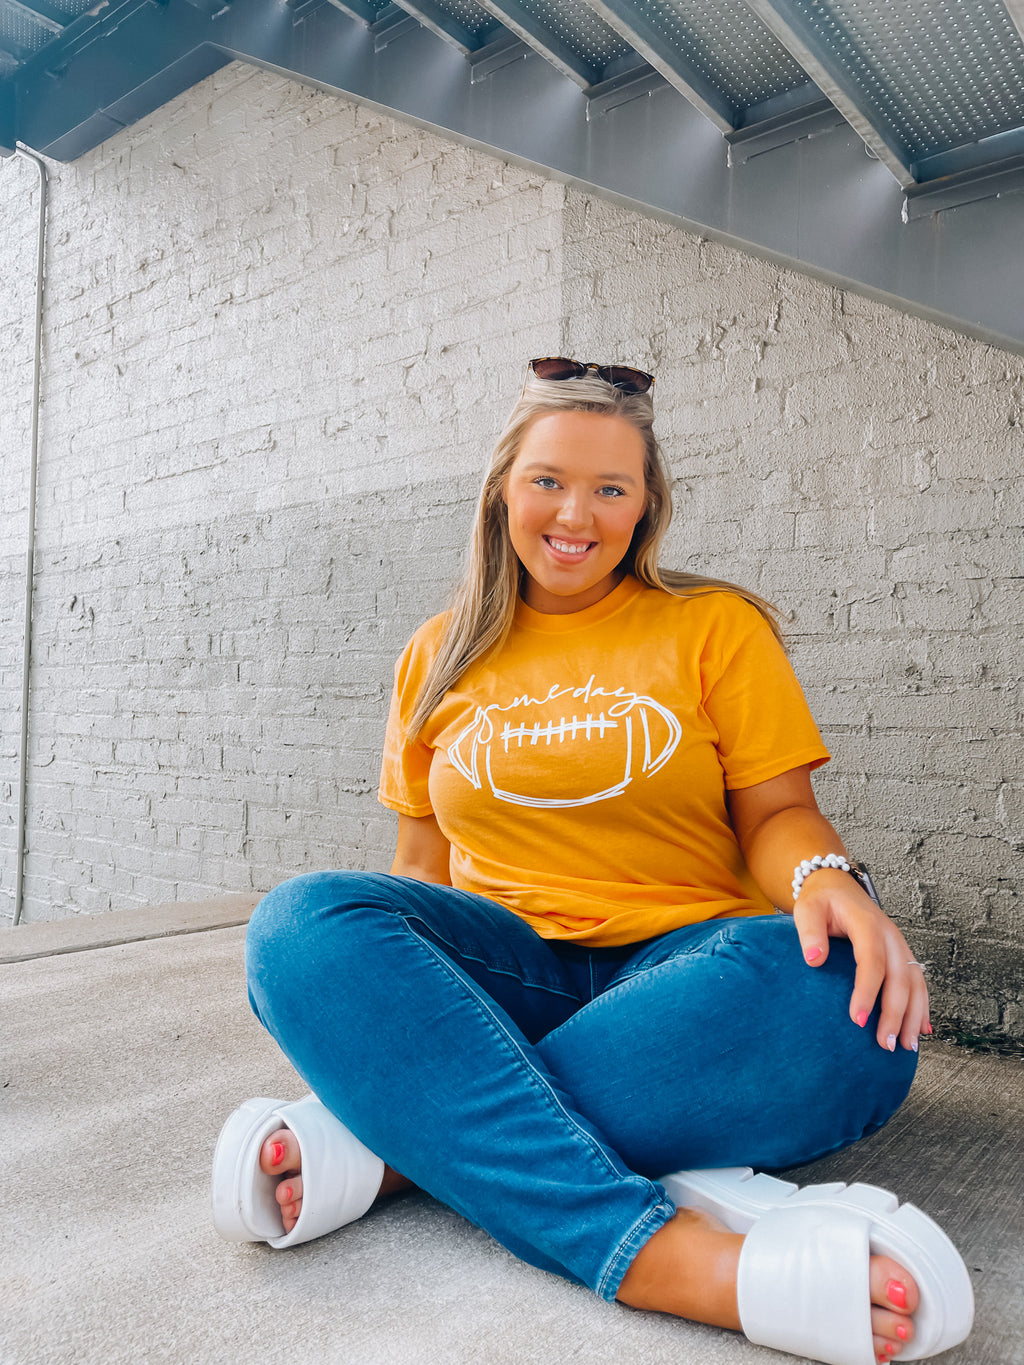 Score a touchdown in style with this Football Gameday Graphic Tee! Whether you're tailgating or watching from home, you'll be ready to cheer on your favorite team with this comfy, unisex design. This one's a surefire winner! Go long! ;)-MUSTARD